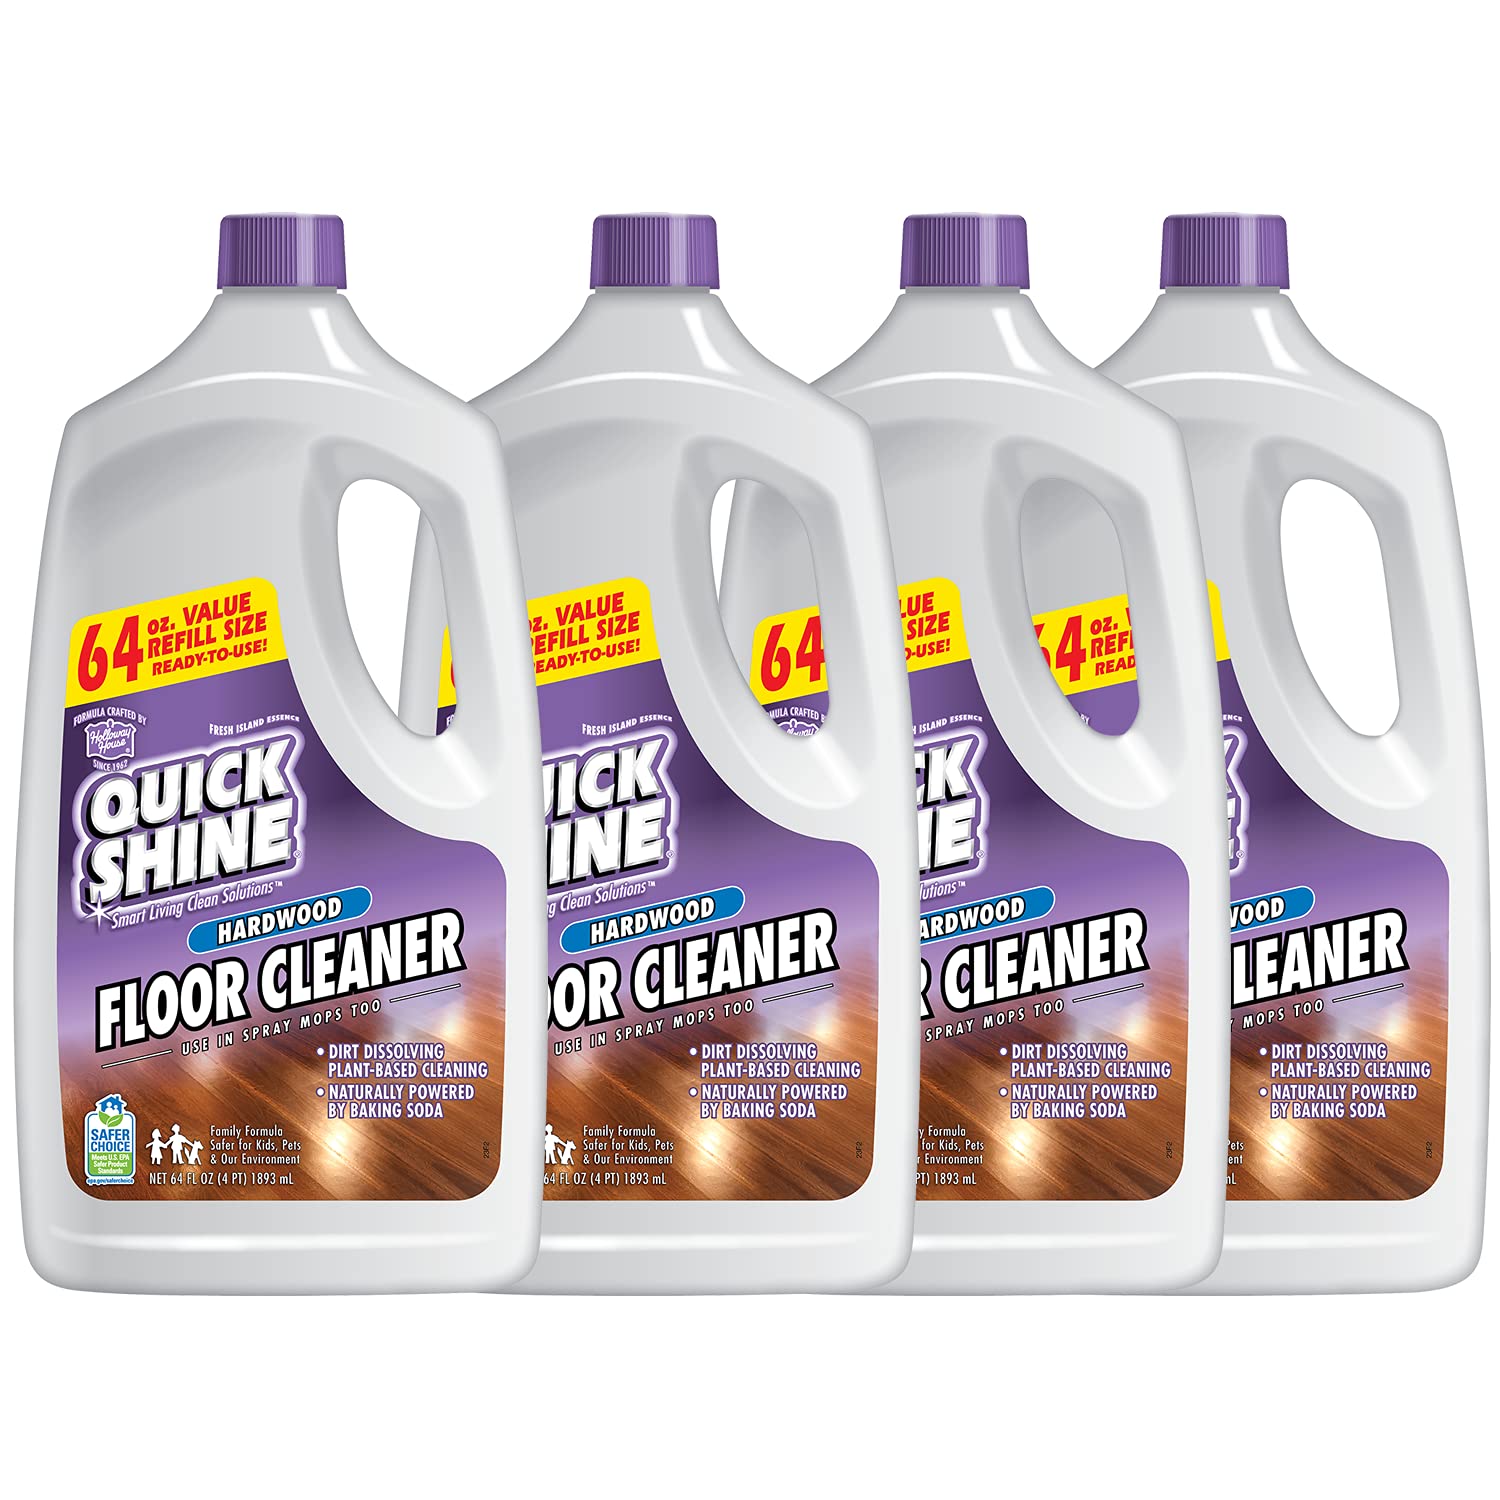 Quick Shine High Traffic Hardwood Floor Cleaner Spray Mop Solution, 64 oz, Naturally Powered by Baking Soda for Easy Streak-Free Zero-Residue Clean...